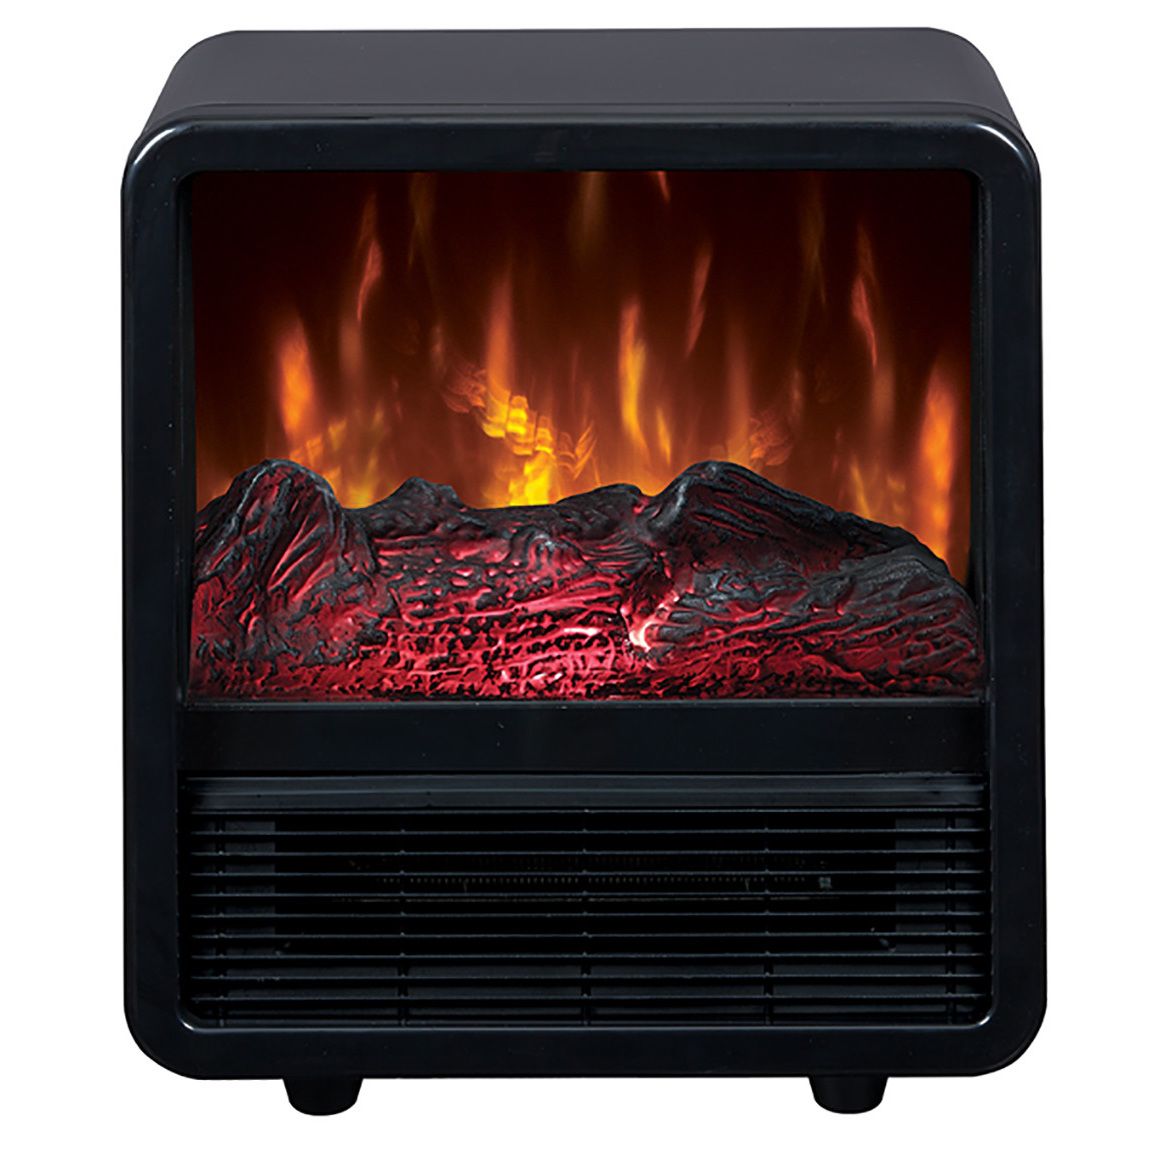 Heaters that Look Like Fireplaces New Duraflame Cfs 300 Blk Portable Electric Personal Space